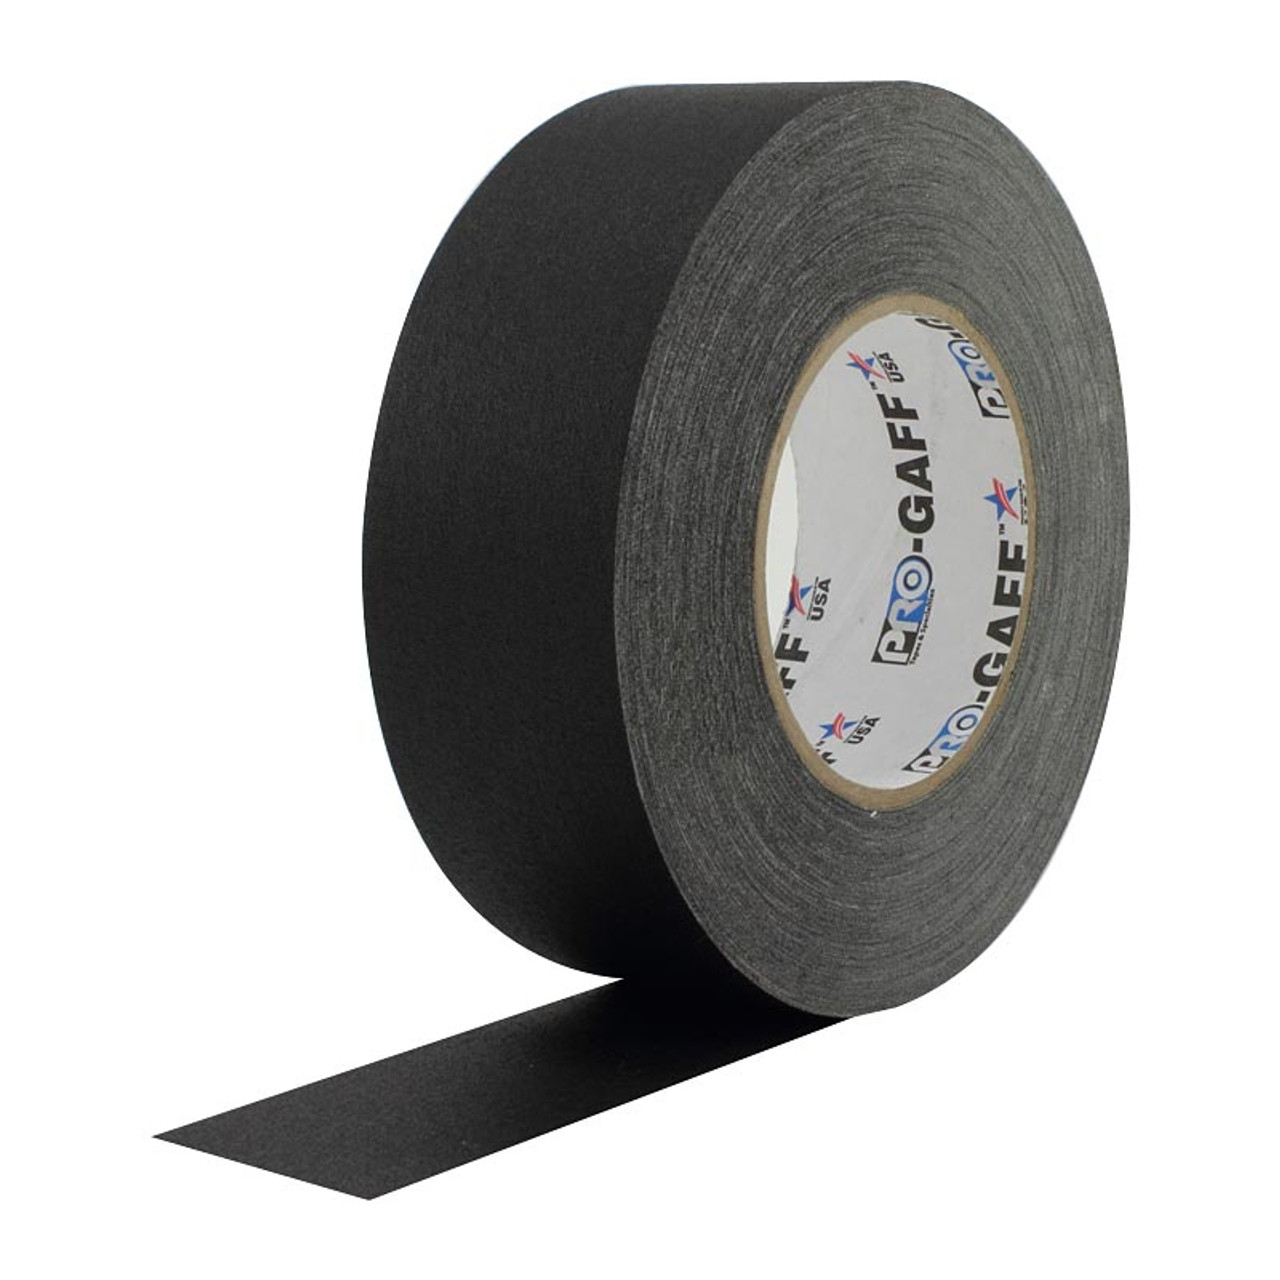 Pro Gaff Black Gaffers Tape 2 x 55 yd Roll - Monkey Wrench Productions  Store